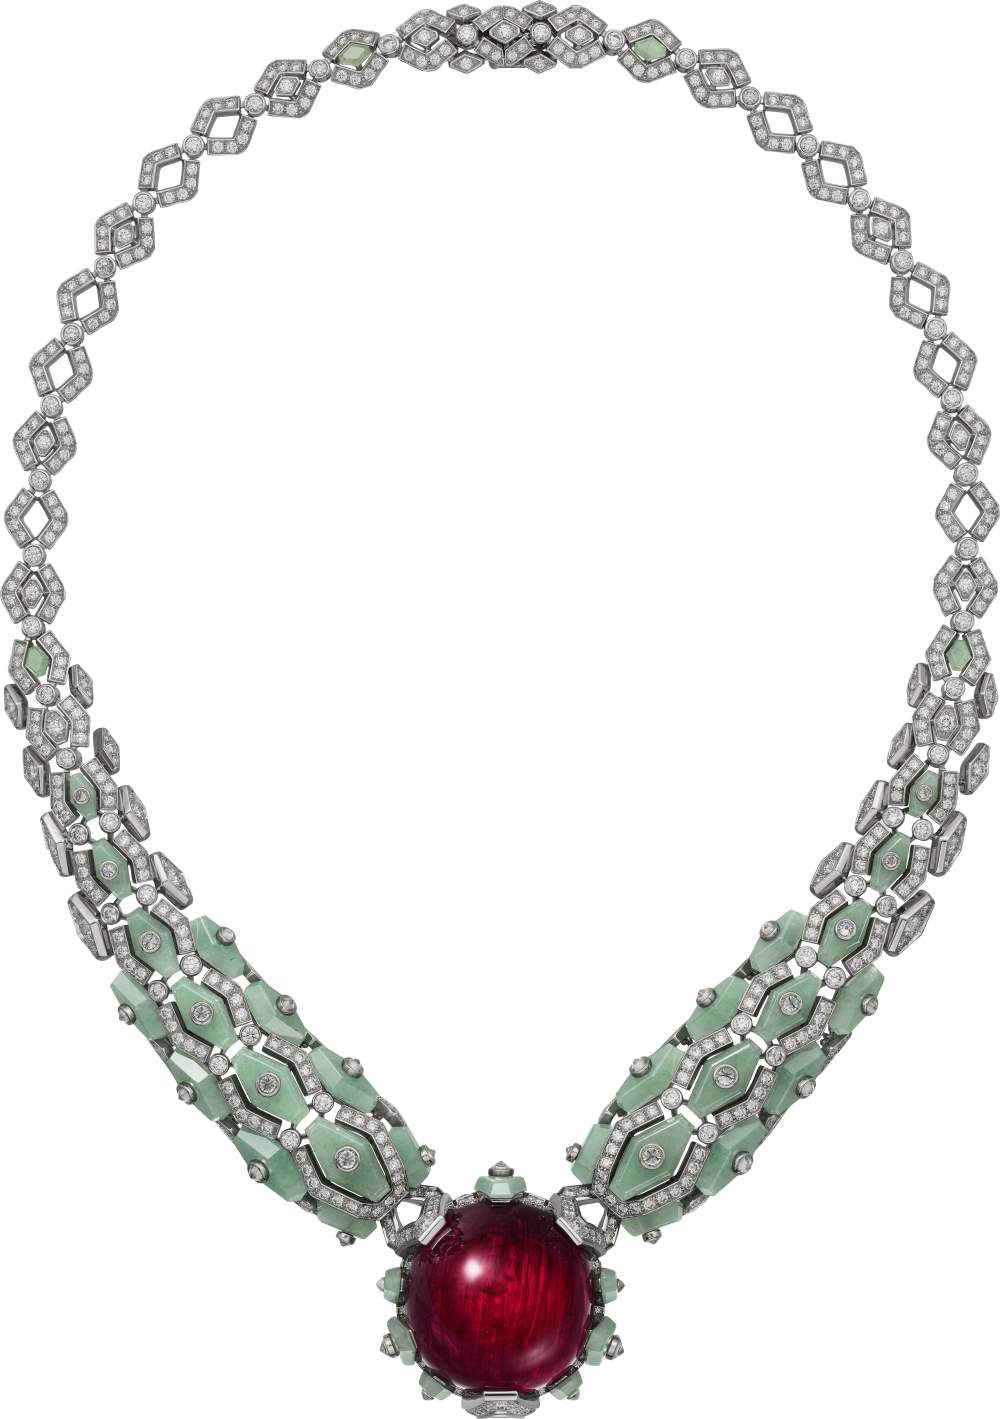 This high jewellery necklace was one of Cartier's creations showcased at 'Markers of Style' exhibit. — Picture courtesy of Cartier